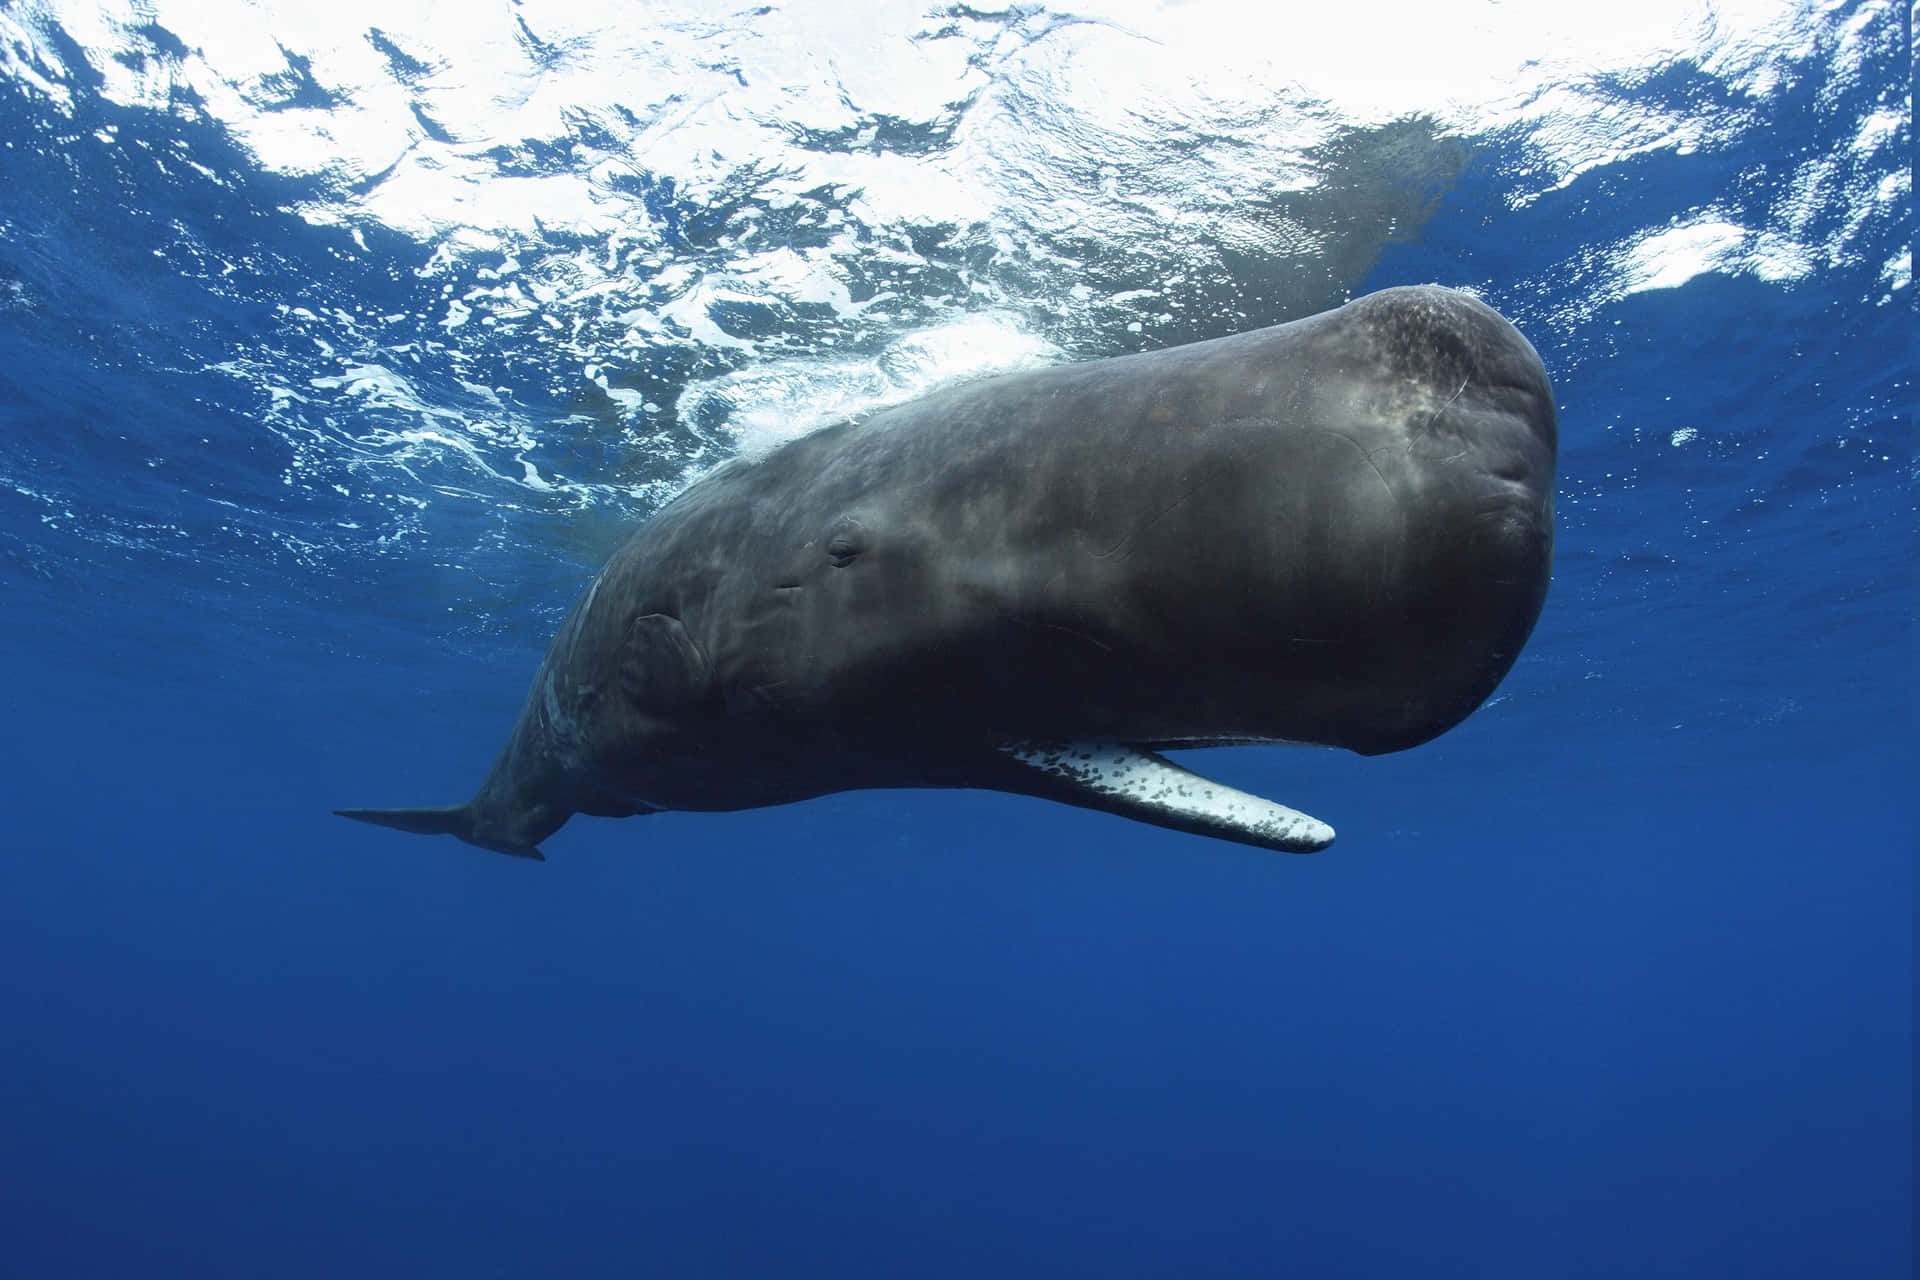 A majestic Sperm Whale swimming beneath the ocean's surface